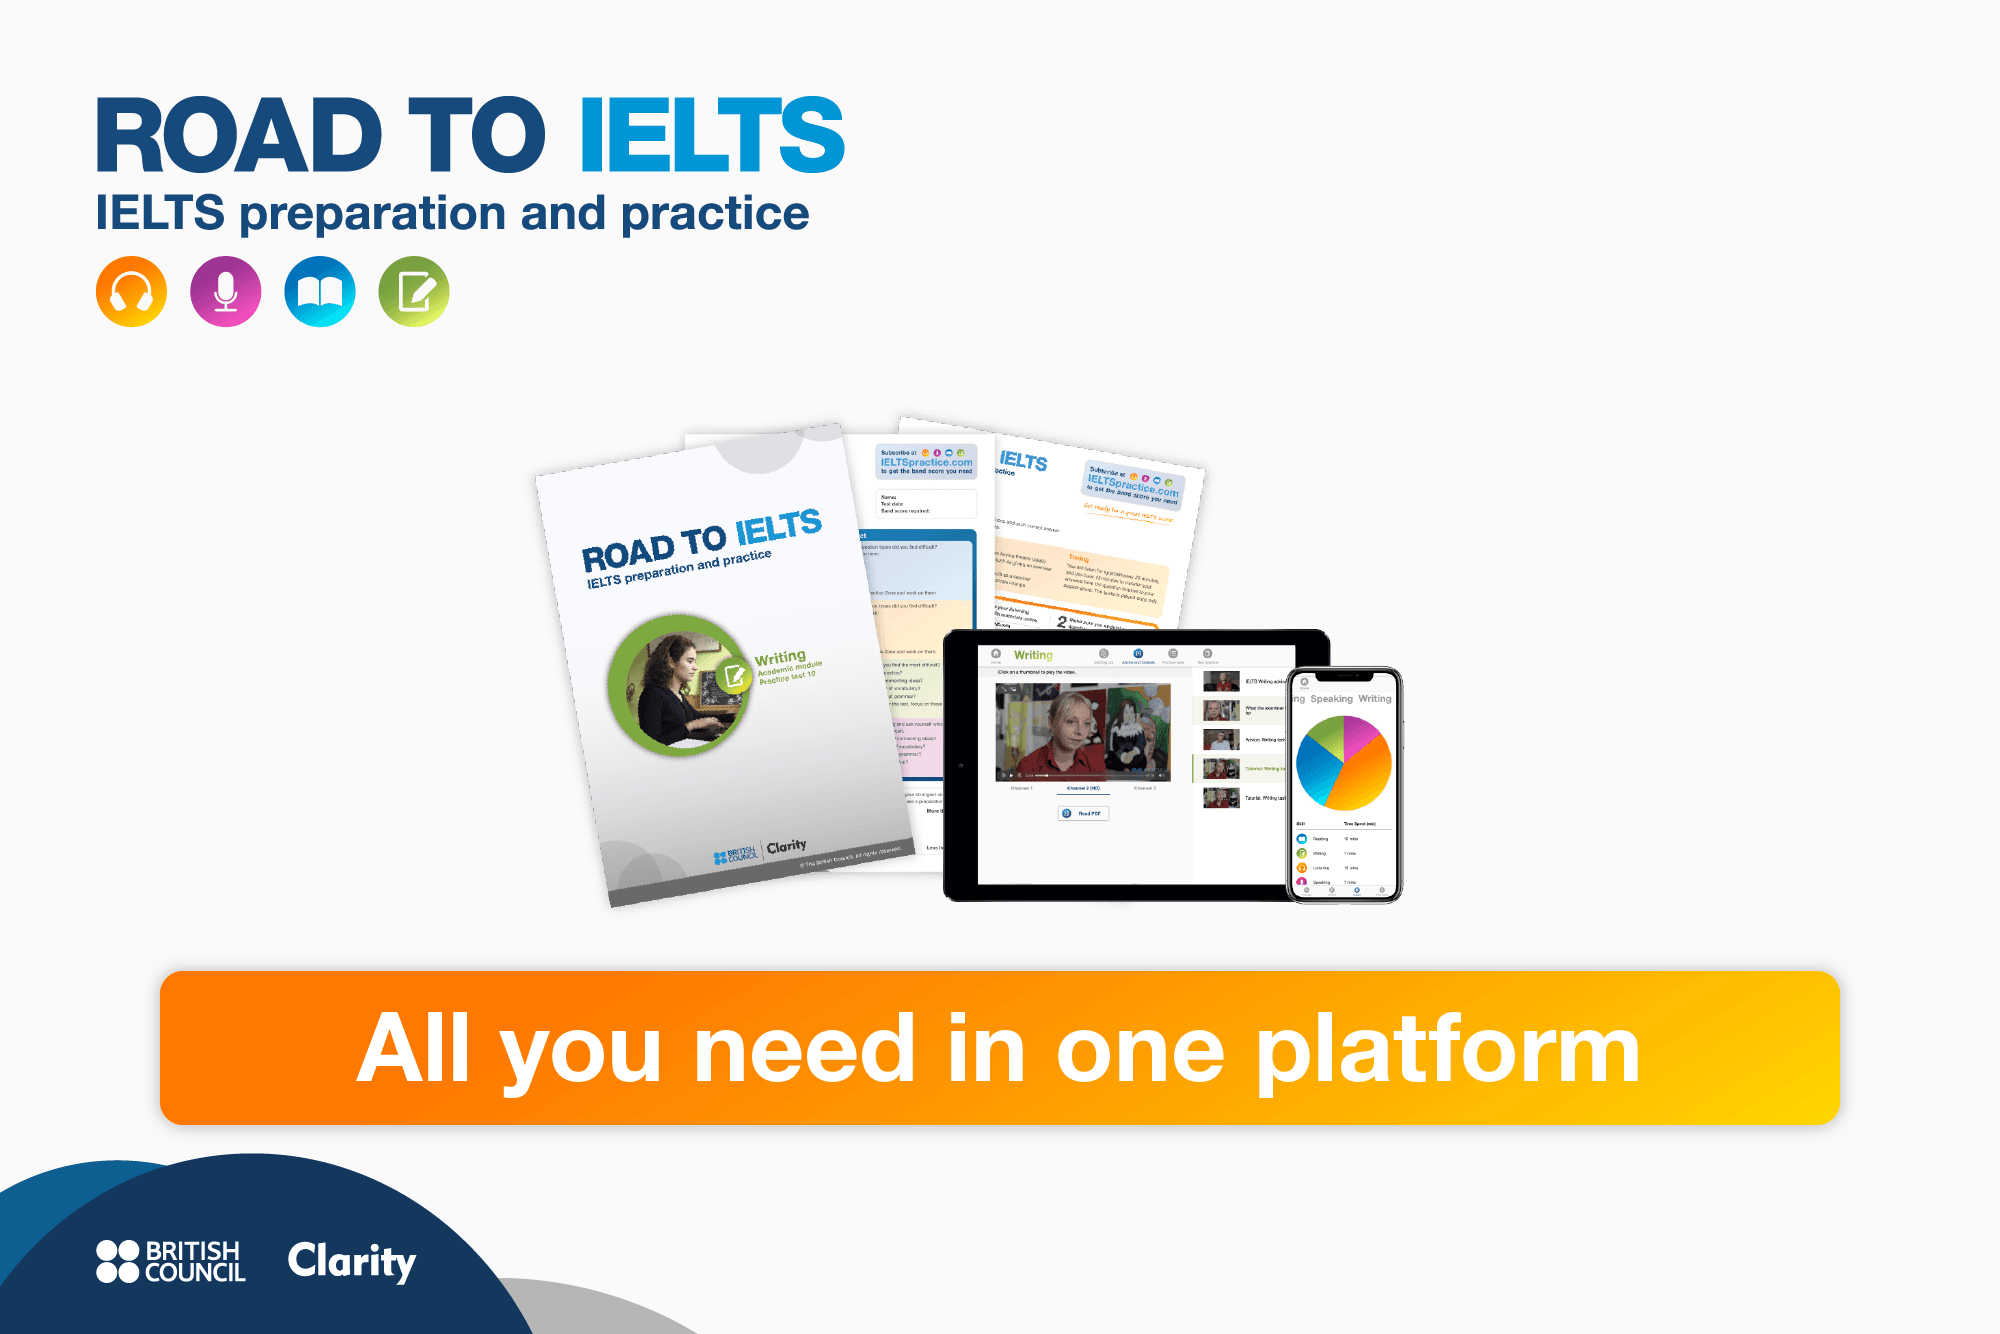 Road to IELTS All you need is one platform